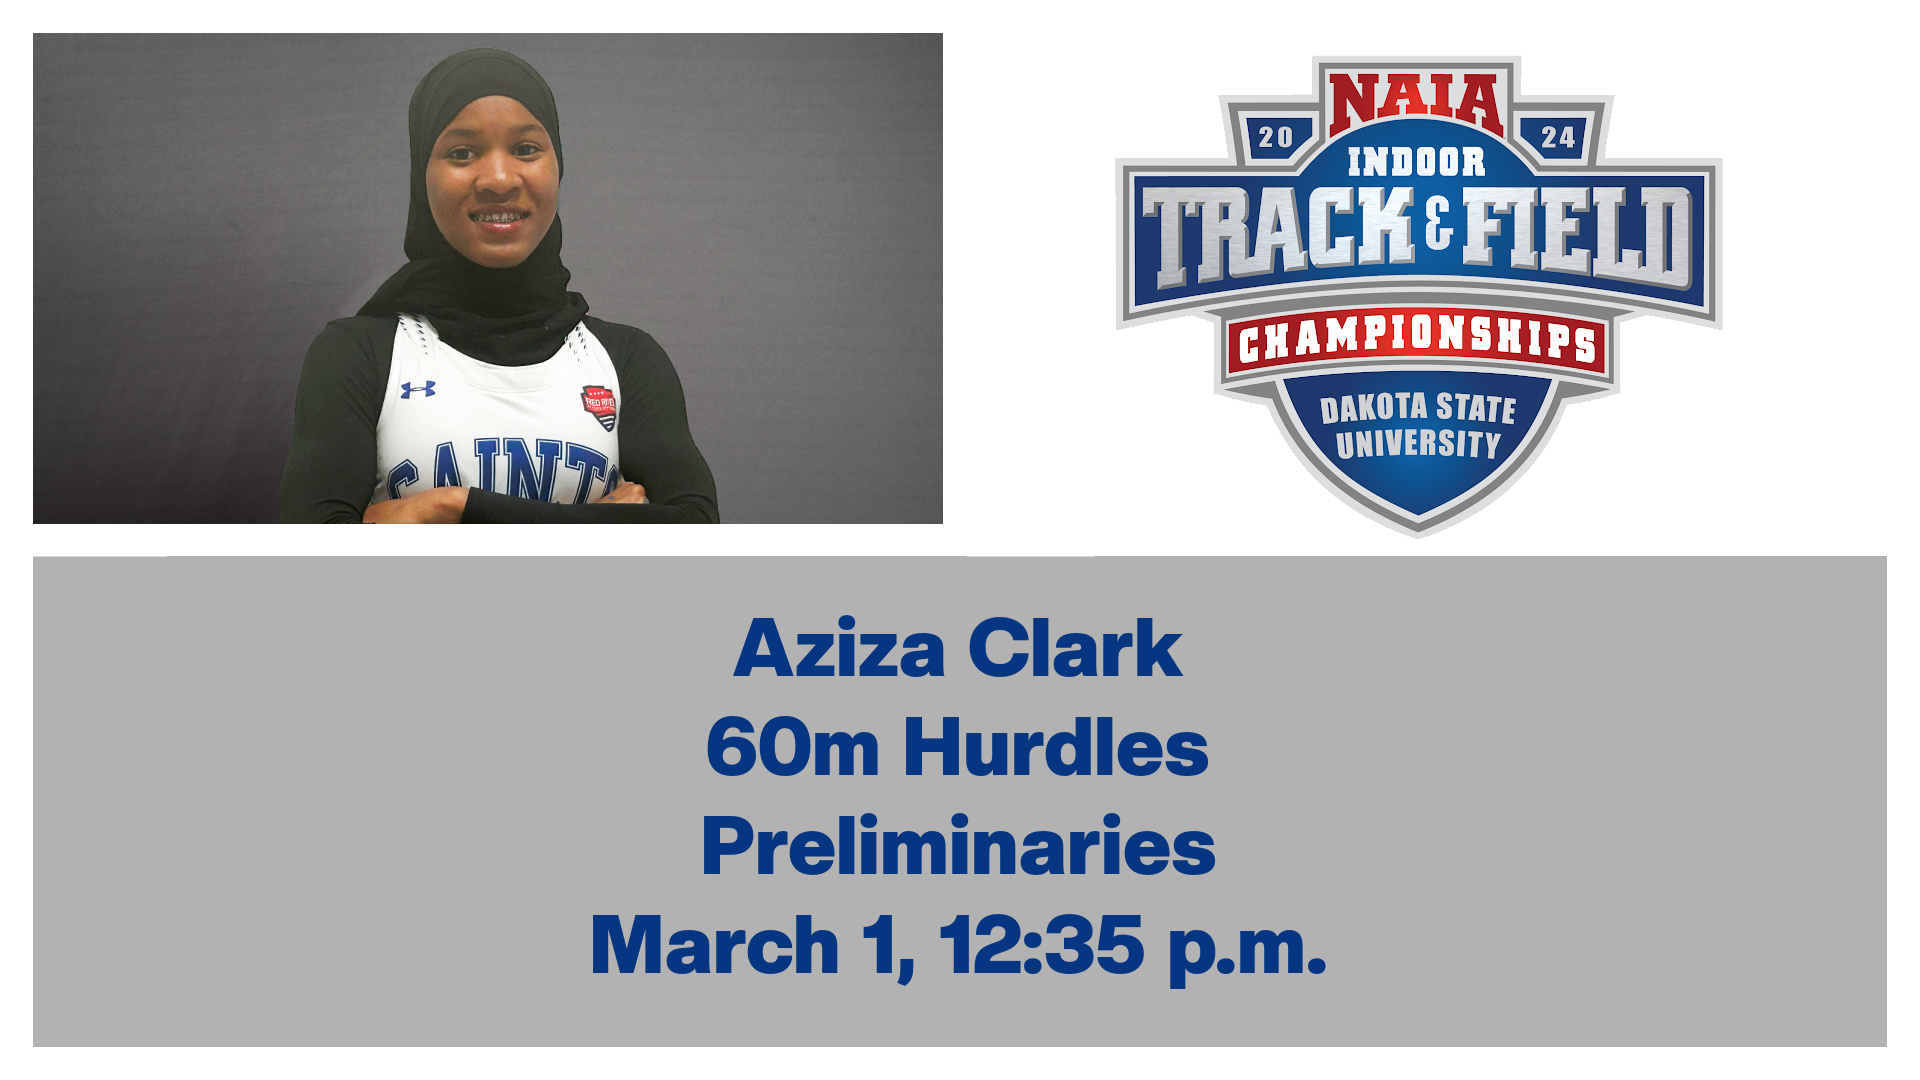 OLLU's Aziza Clark Prepares for Hurdles Today, Women's Relay Team Places 19th in NAIA Indoor Championships